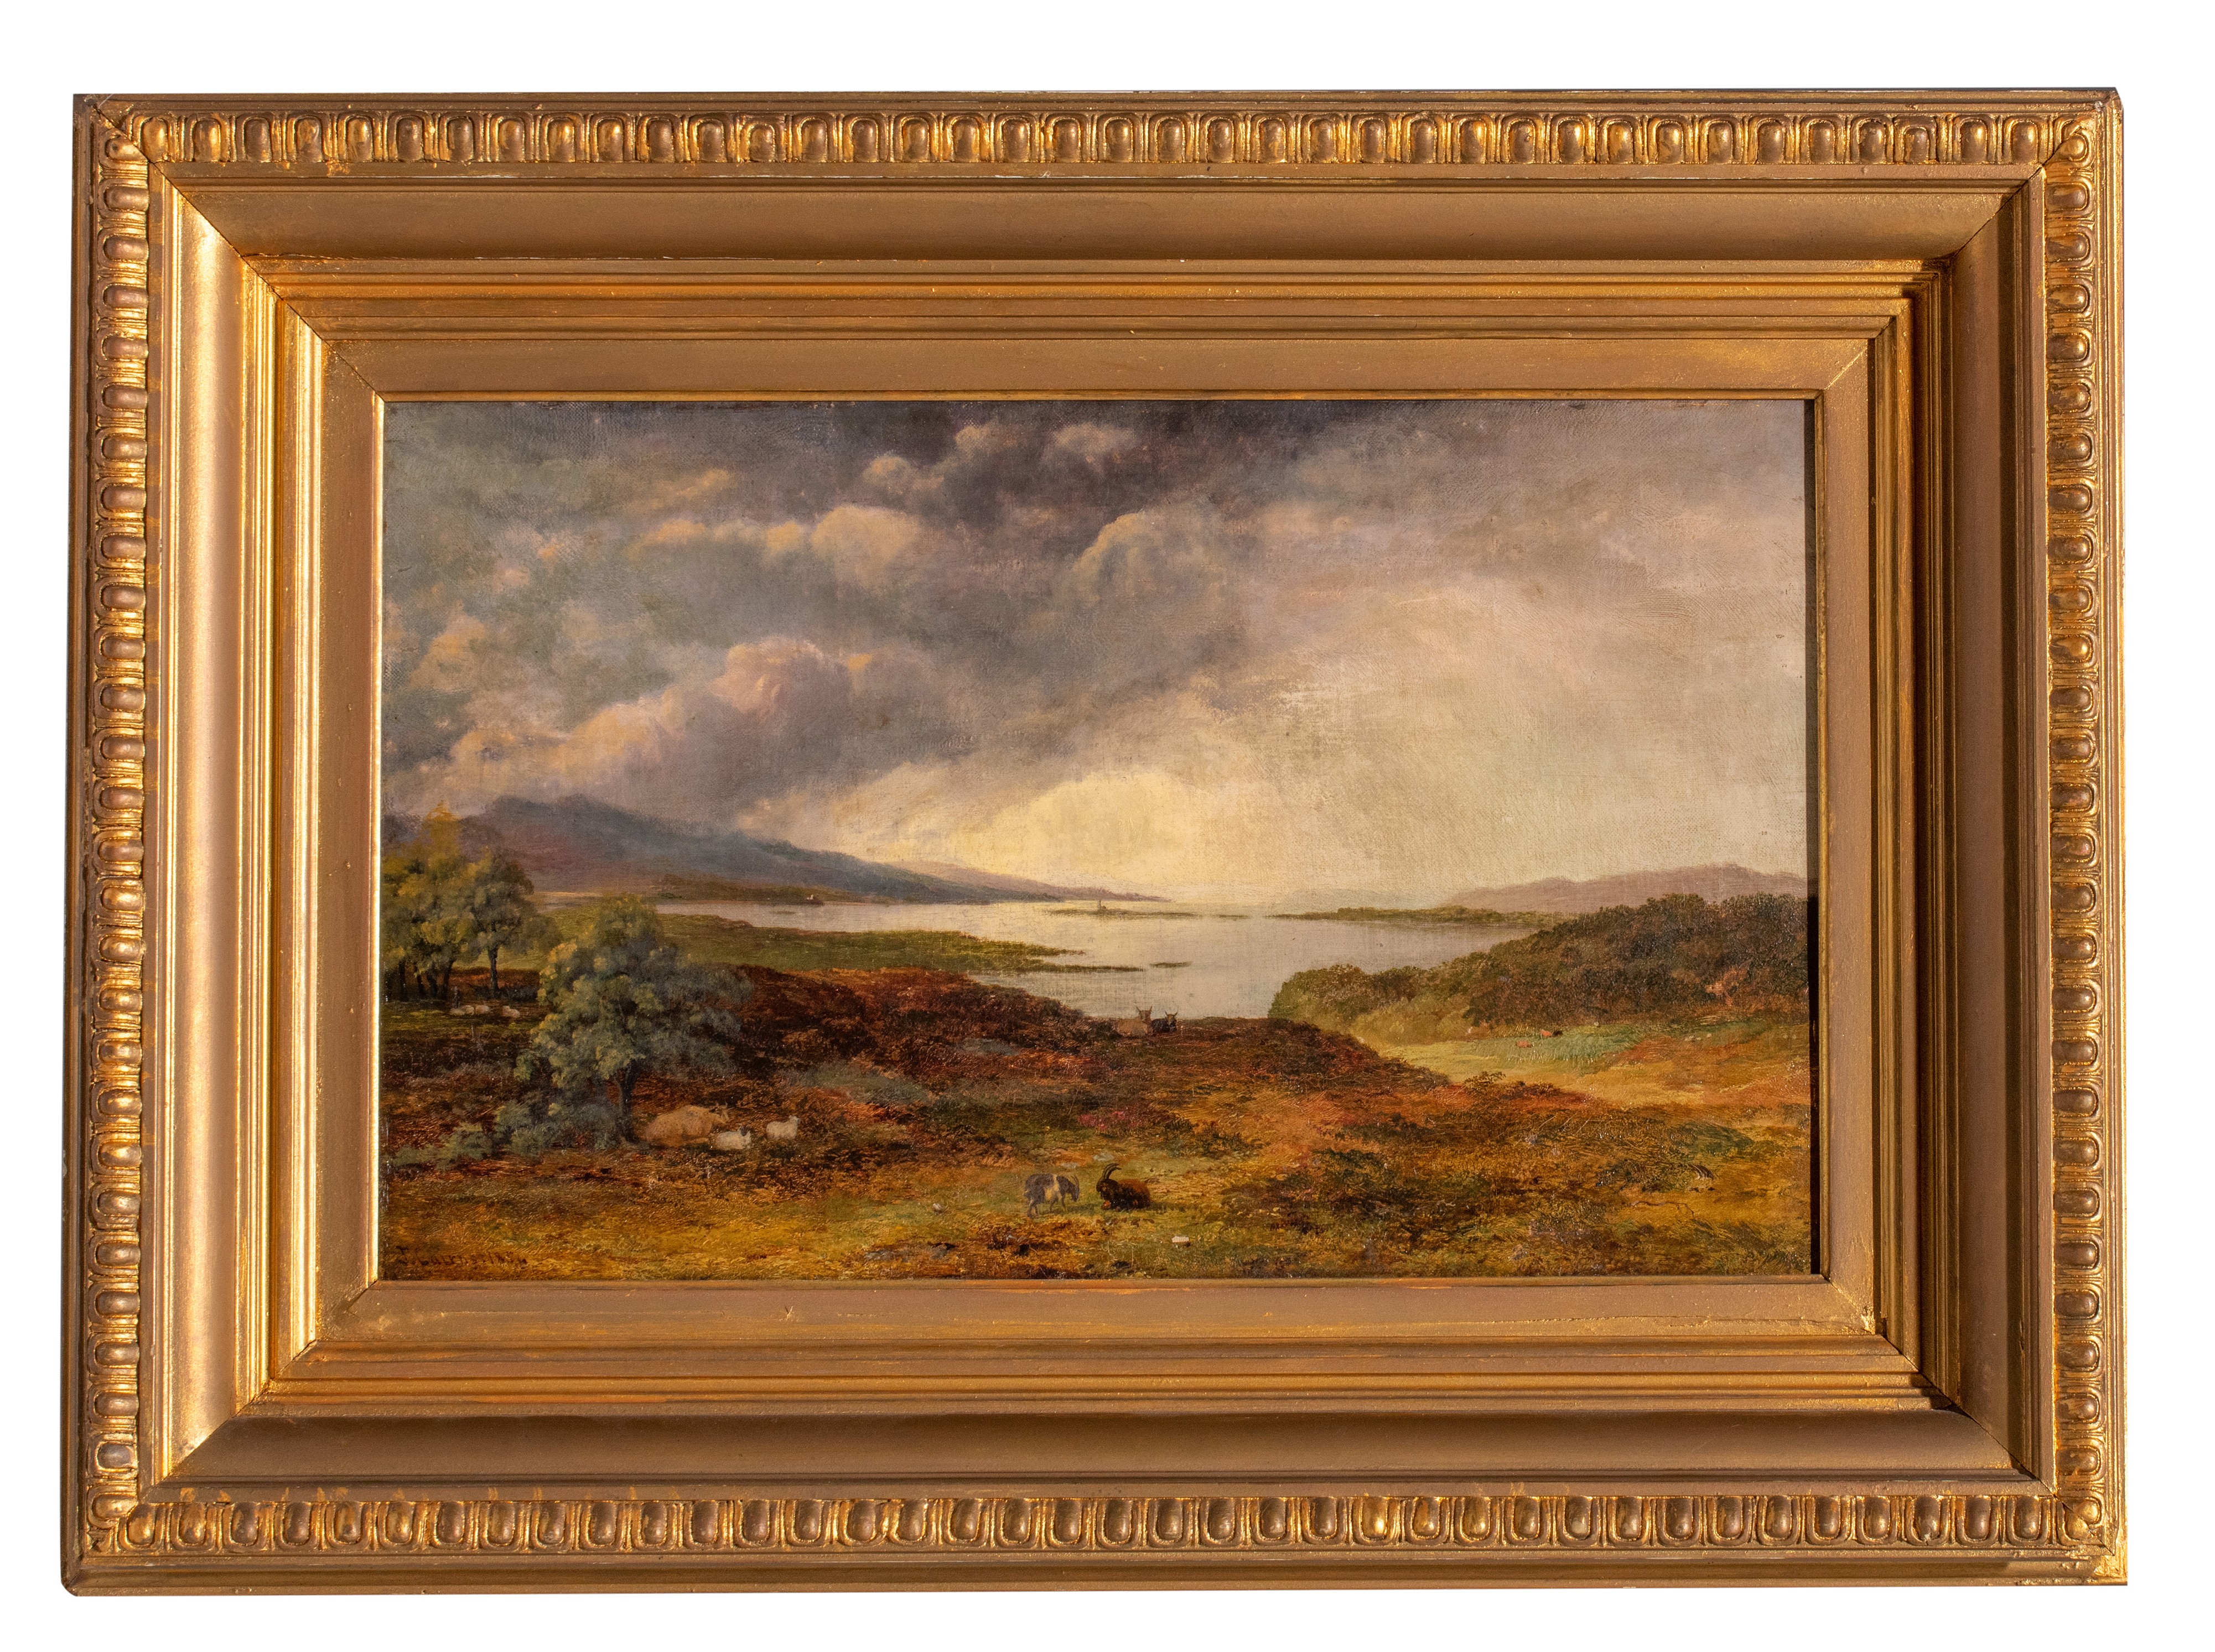 John Cairns (ca. 1845-1867), the Scottish Highlands, 1854, oil on canvas, 29 x 47 cm - Image 2 of 6